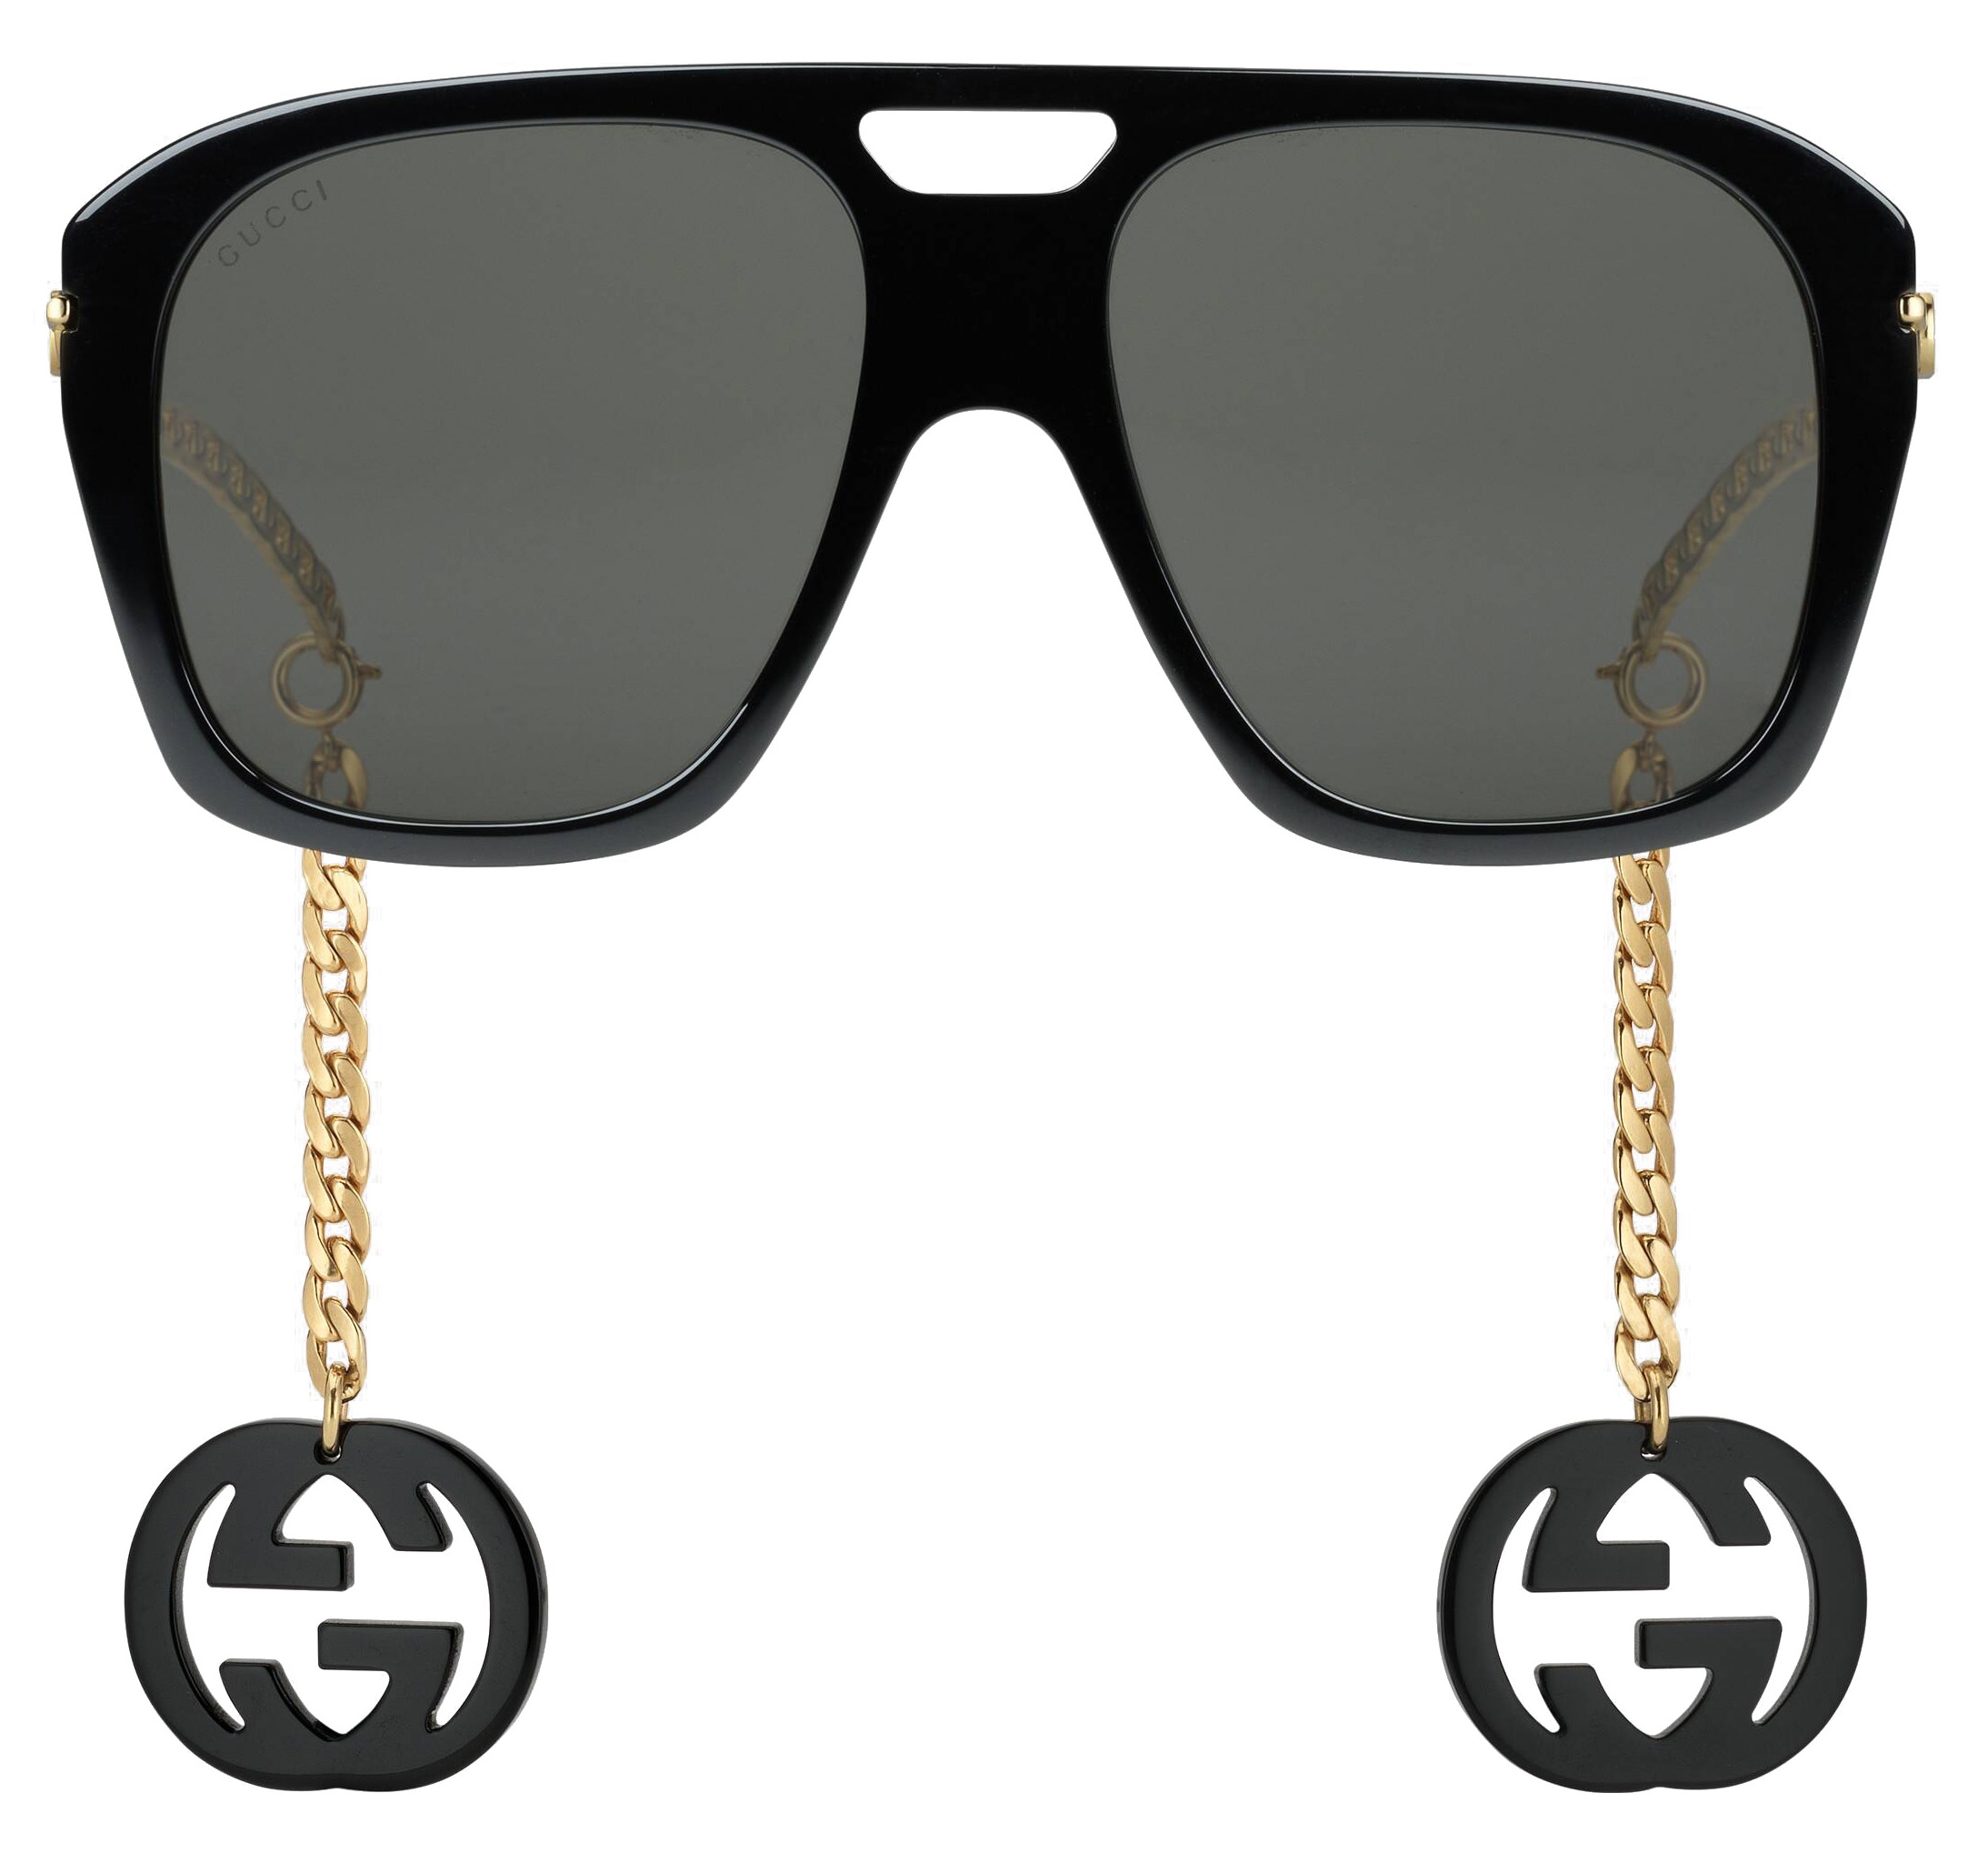 Gucci - Online Exclusive Square Sunglasses with Charms - Black